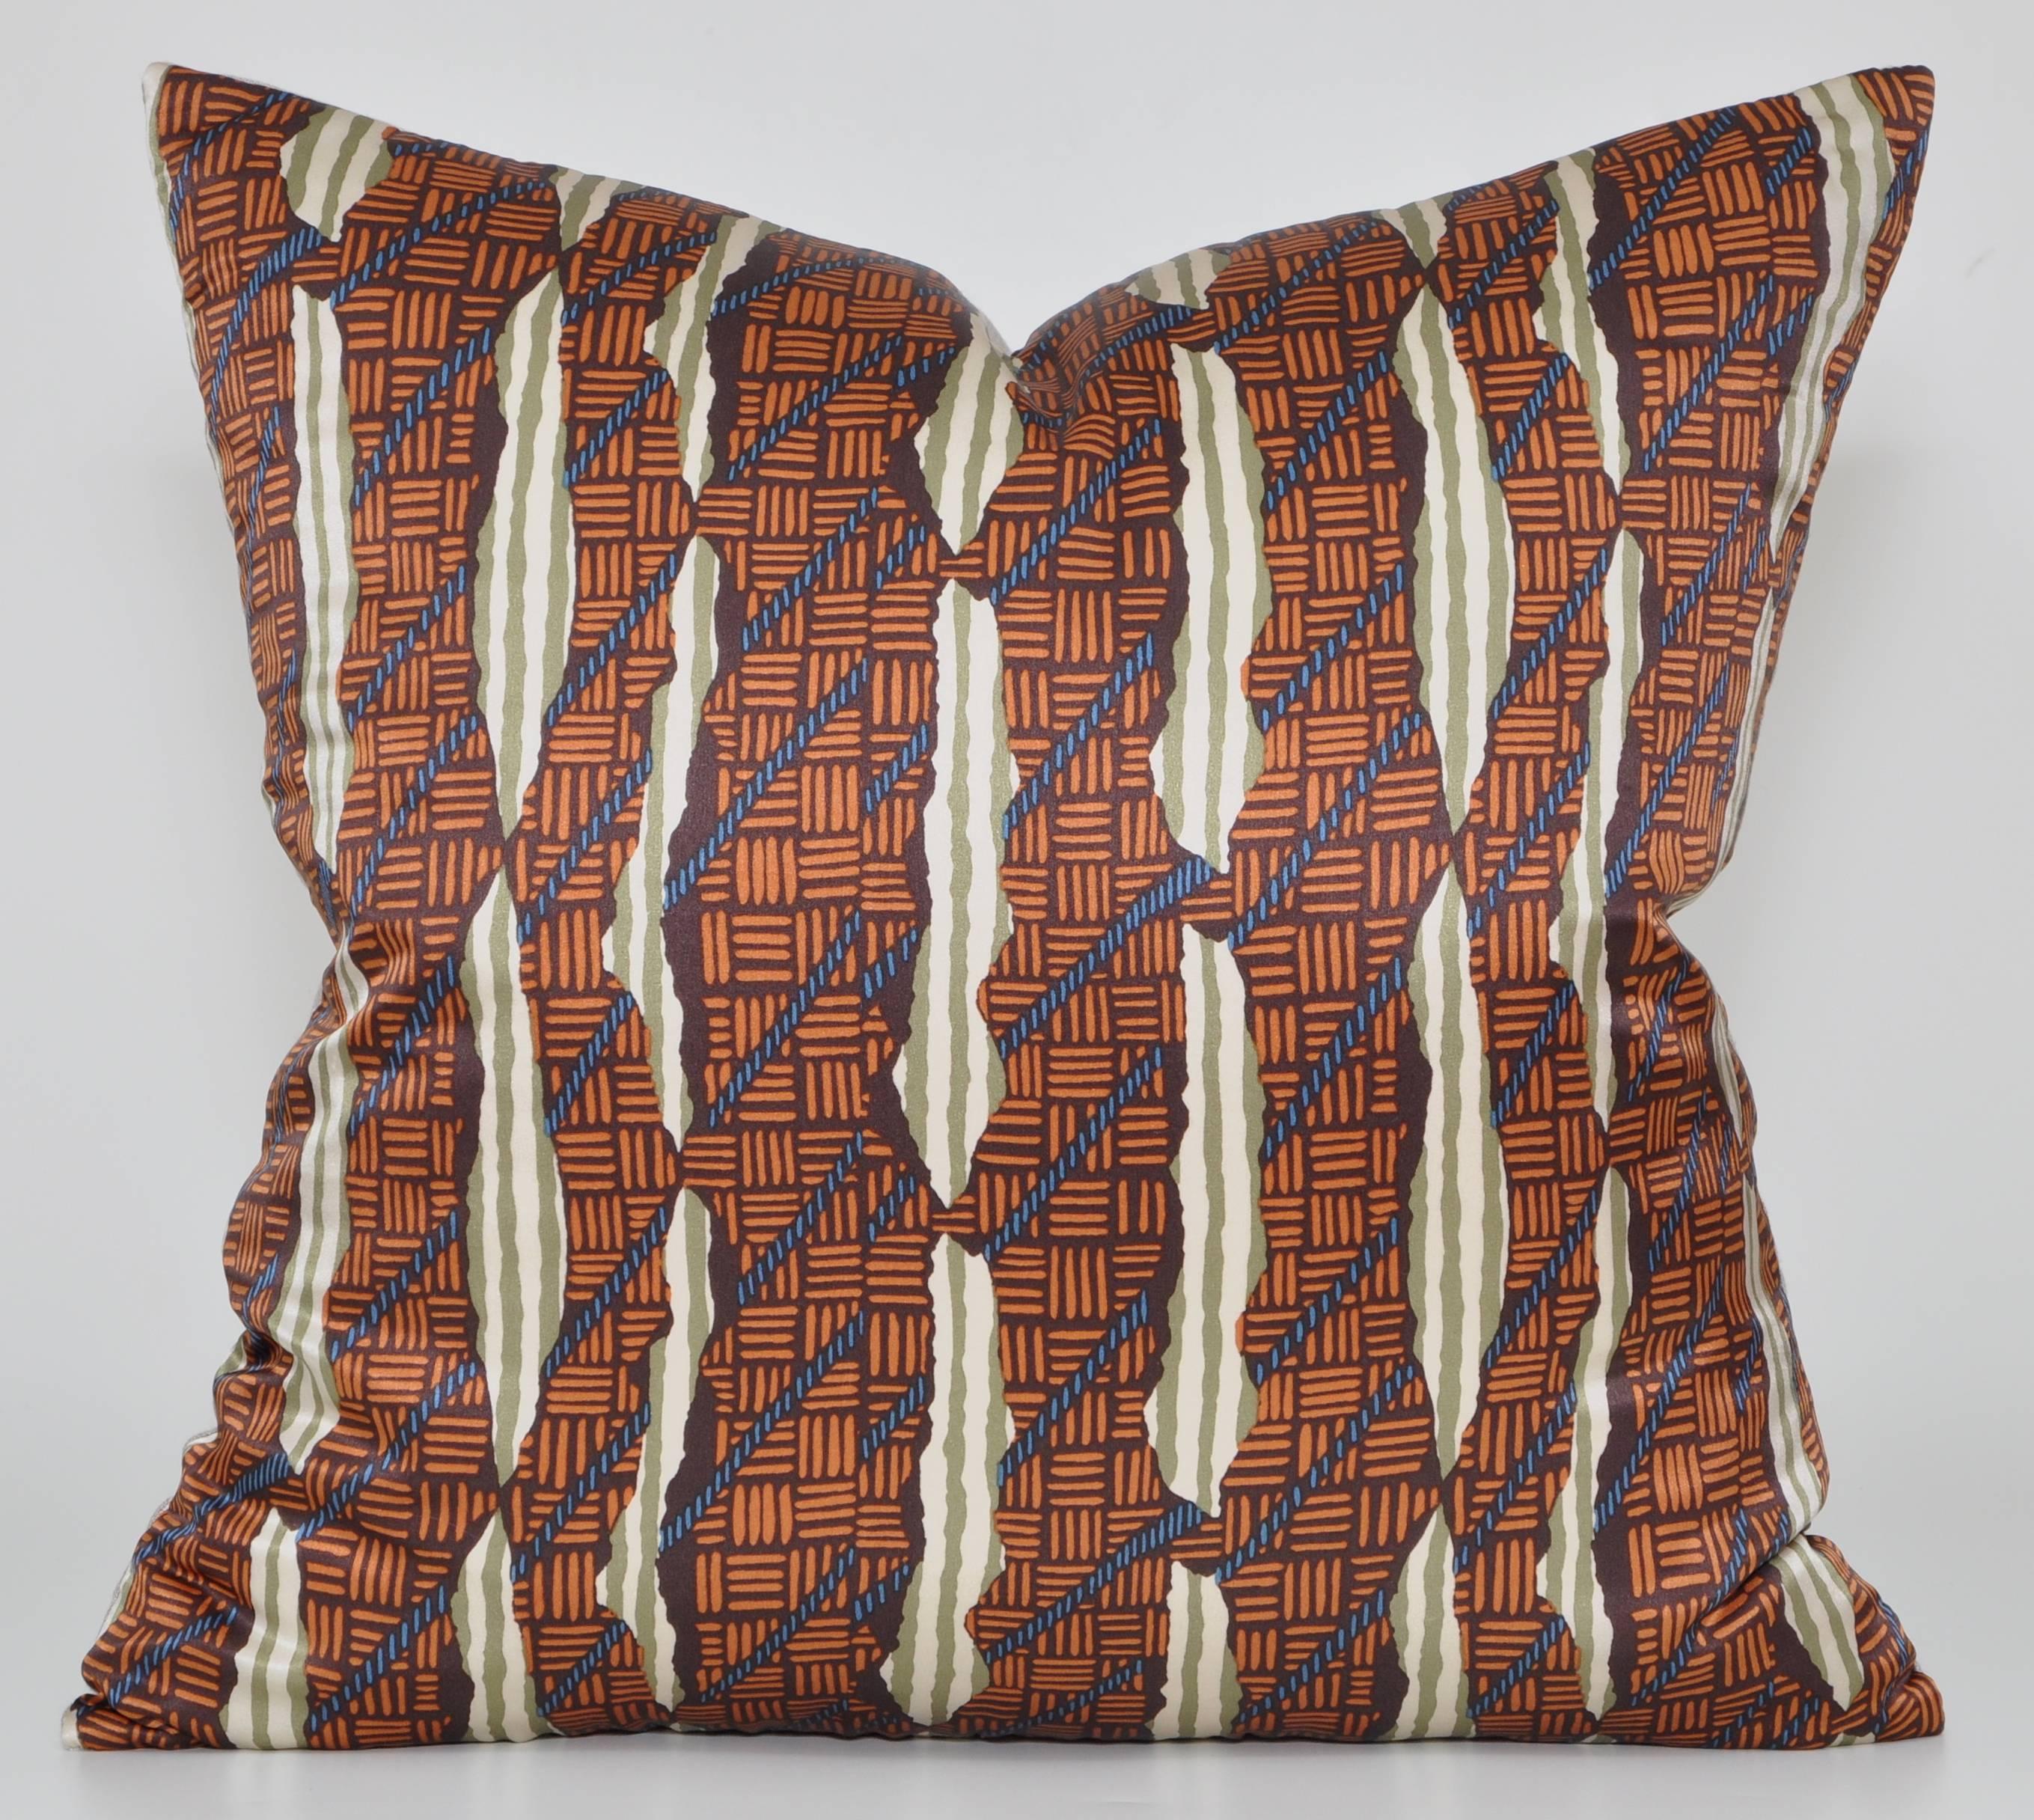 Fabulous plush luxury cushion (pillow) created from a sumptuous Liberty of London silk, beautifully soft to touch in an interesting and complex design. With elements resembling tears and rope, along with stripes and alternating markings, it appears